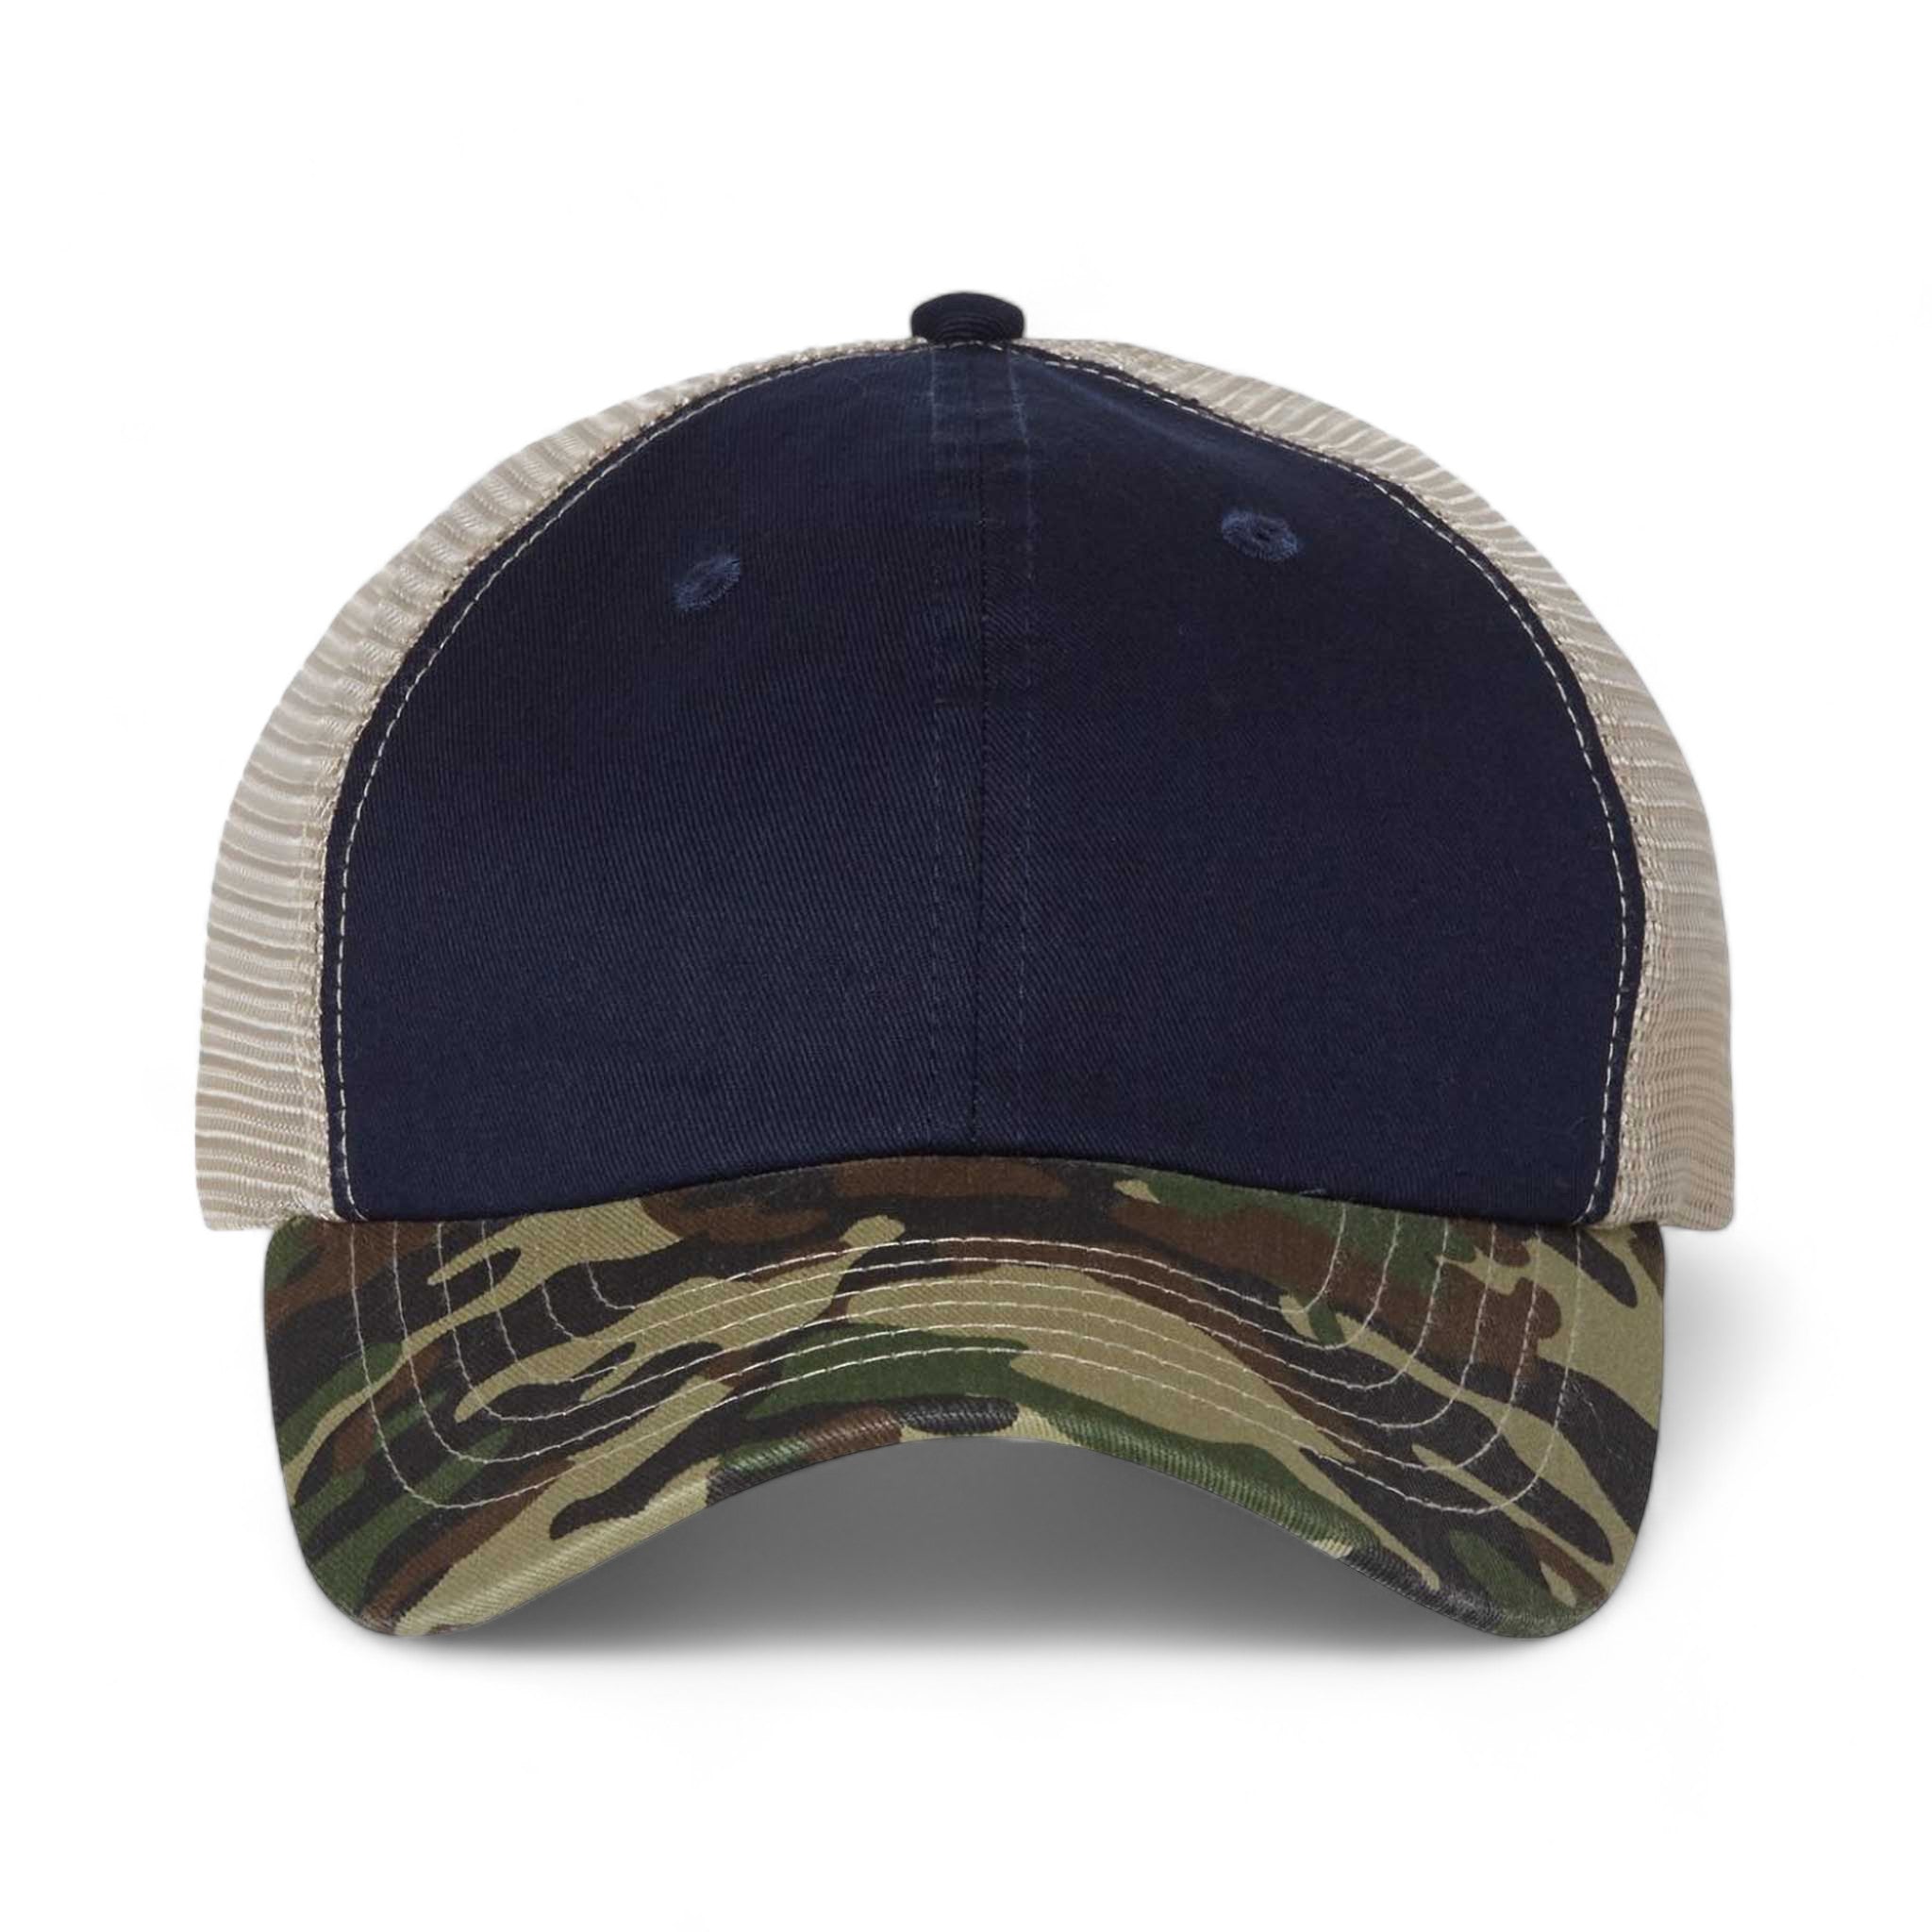 Front view of Sportsman 3100 custom hat in navy, camo and stone